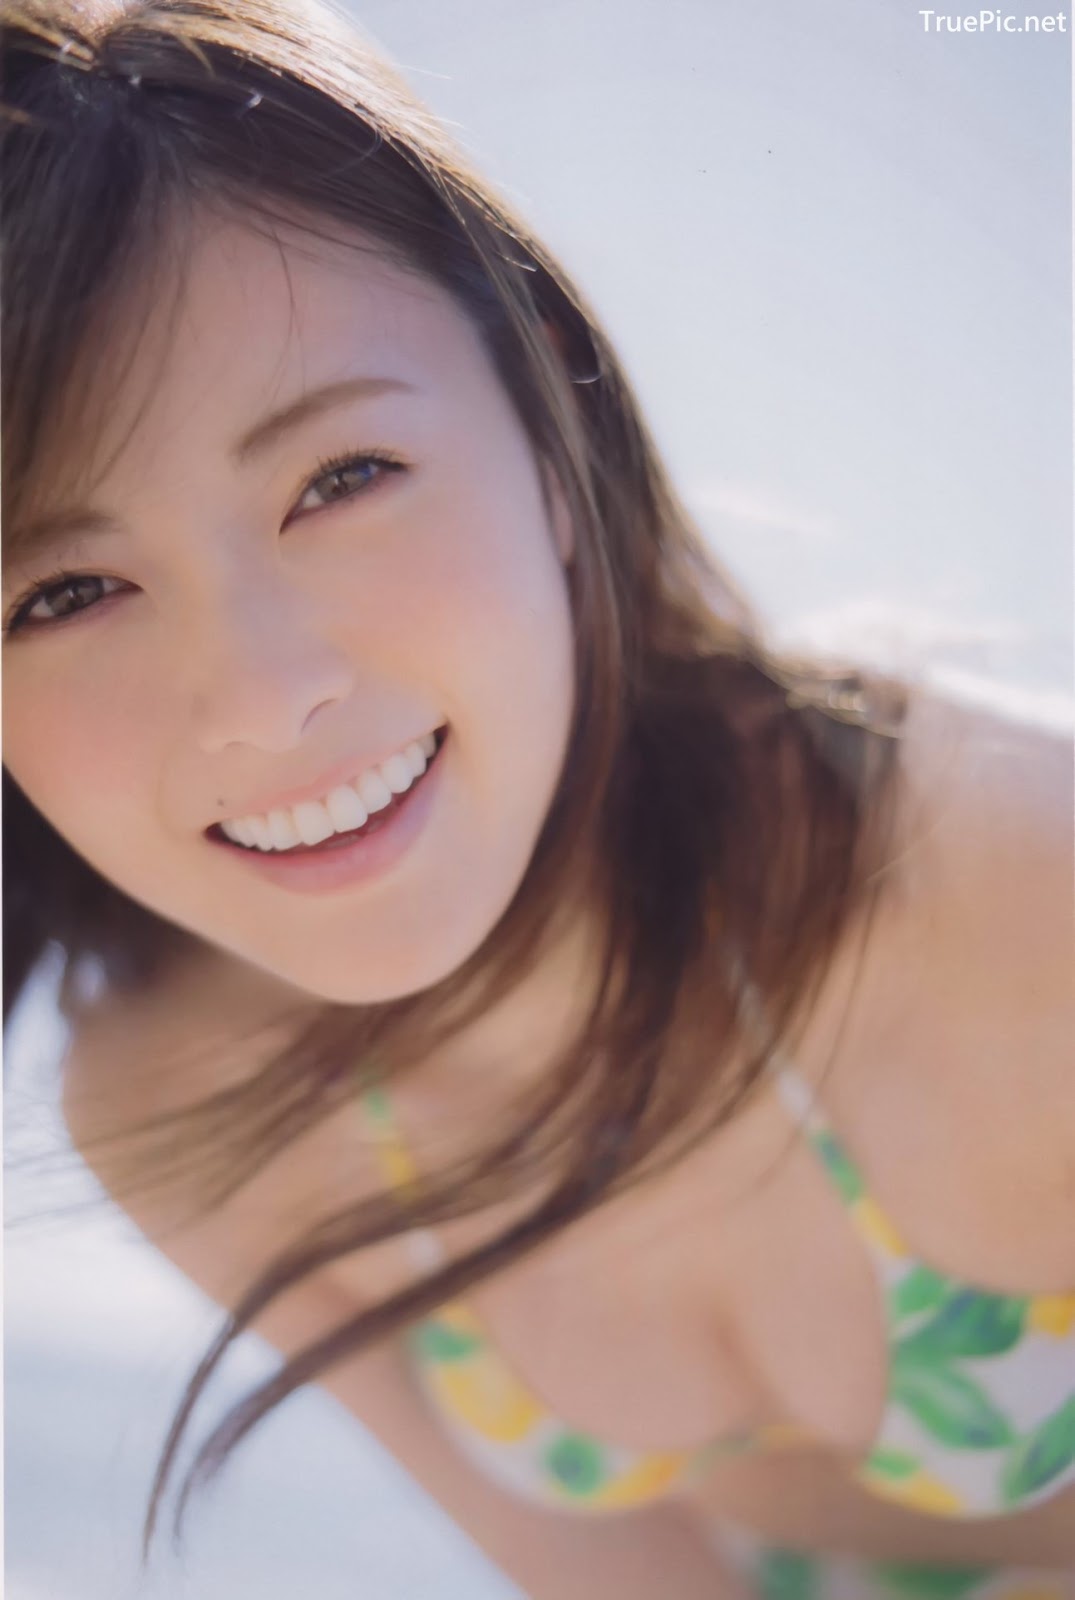 Image Japanese Singer And Model - Mai Shiraishi - Charming Beauty Of Angel - TruePic.net - Picture-16